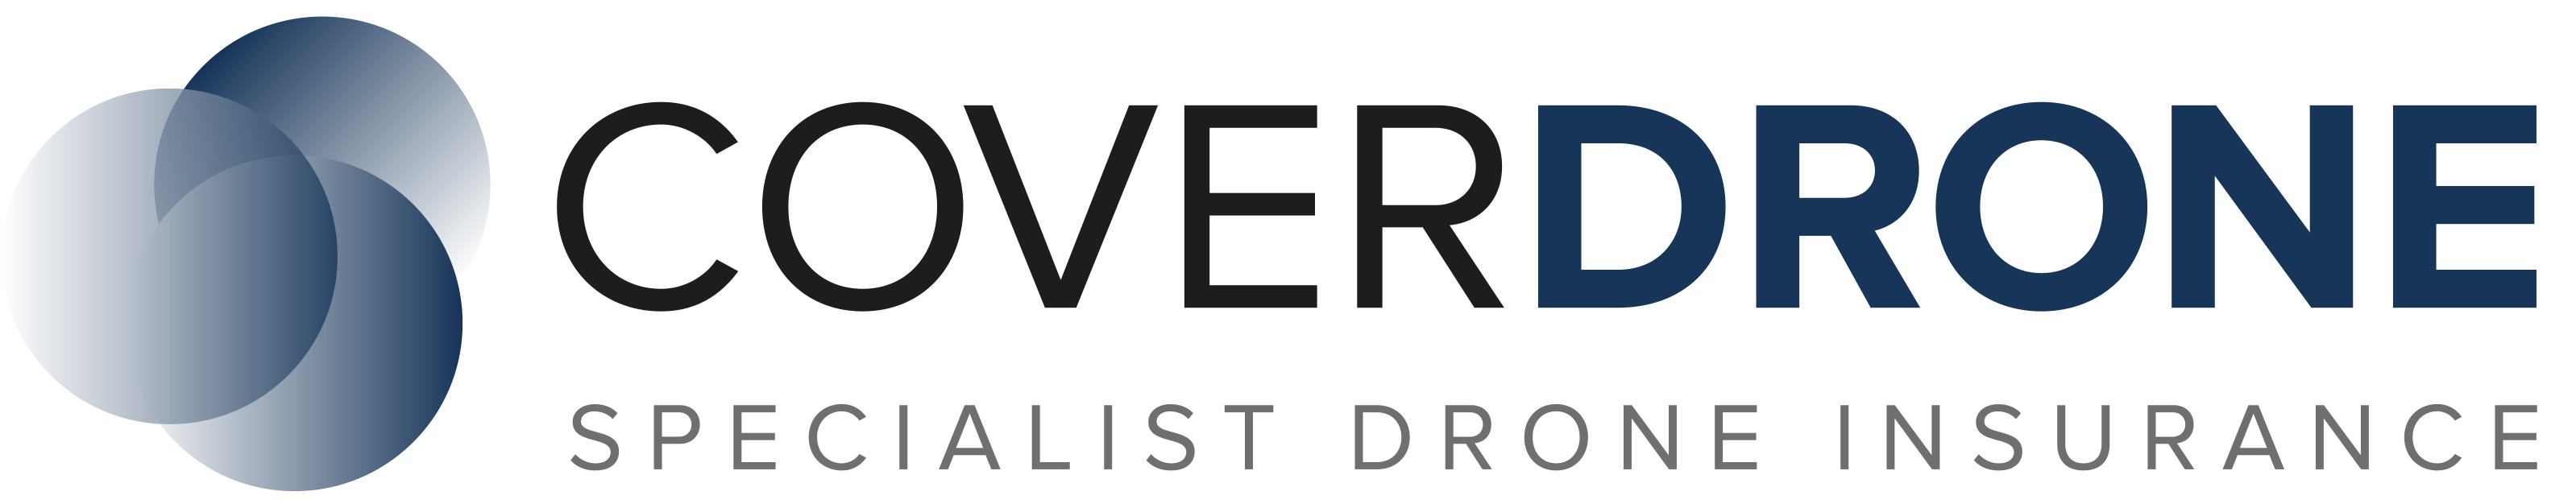 Coverdrone - Specialist Drone Insurance 